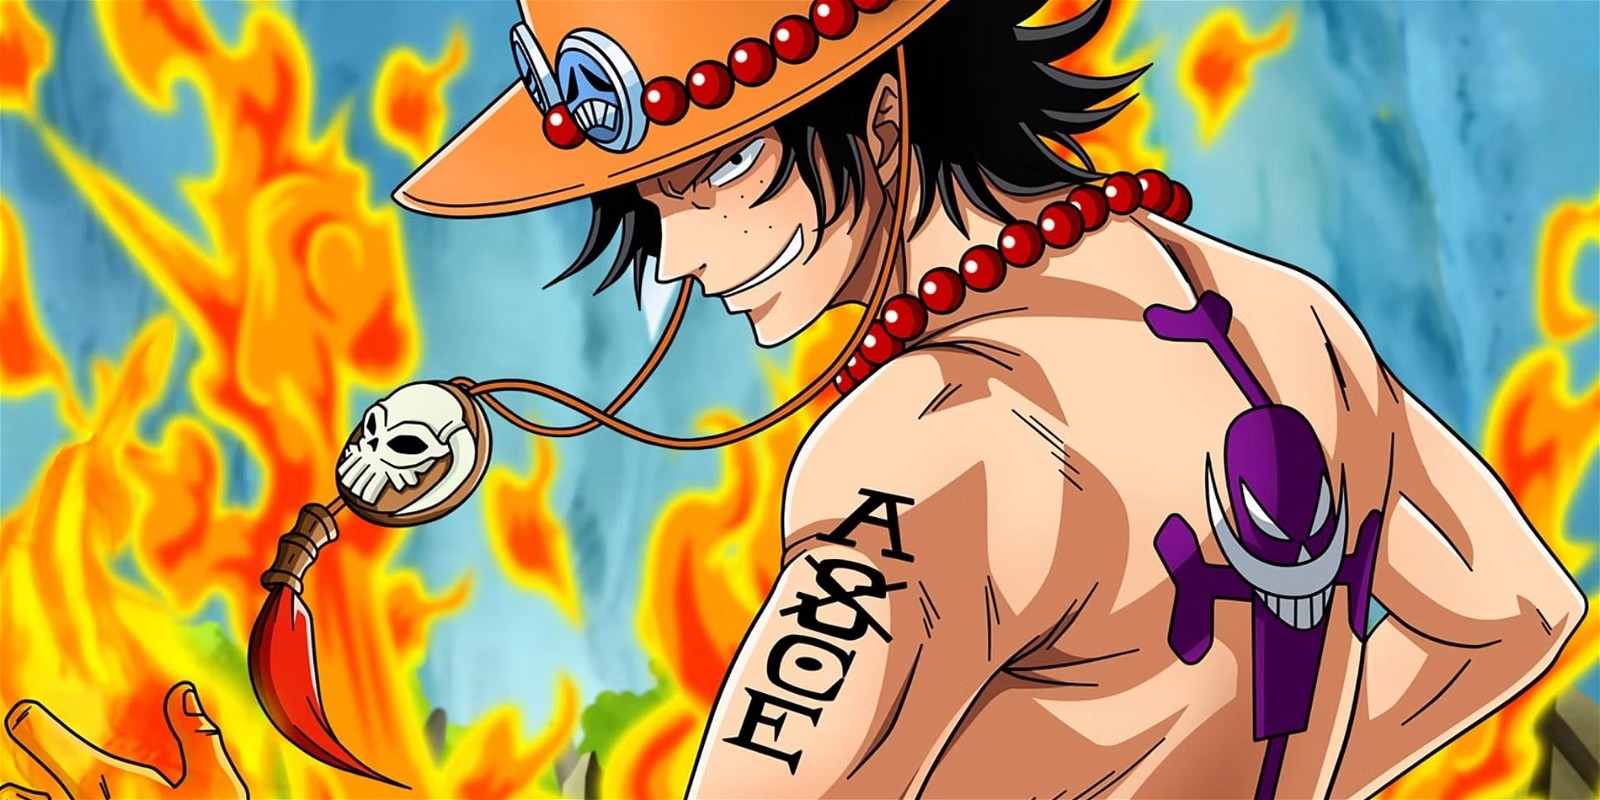 Portgas D. Ace in One Piece